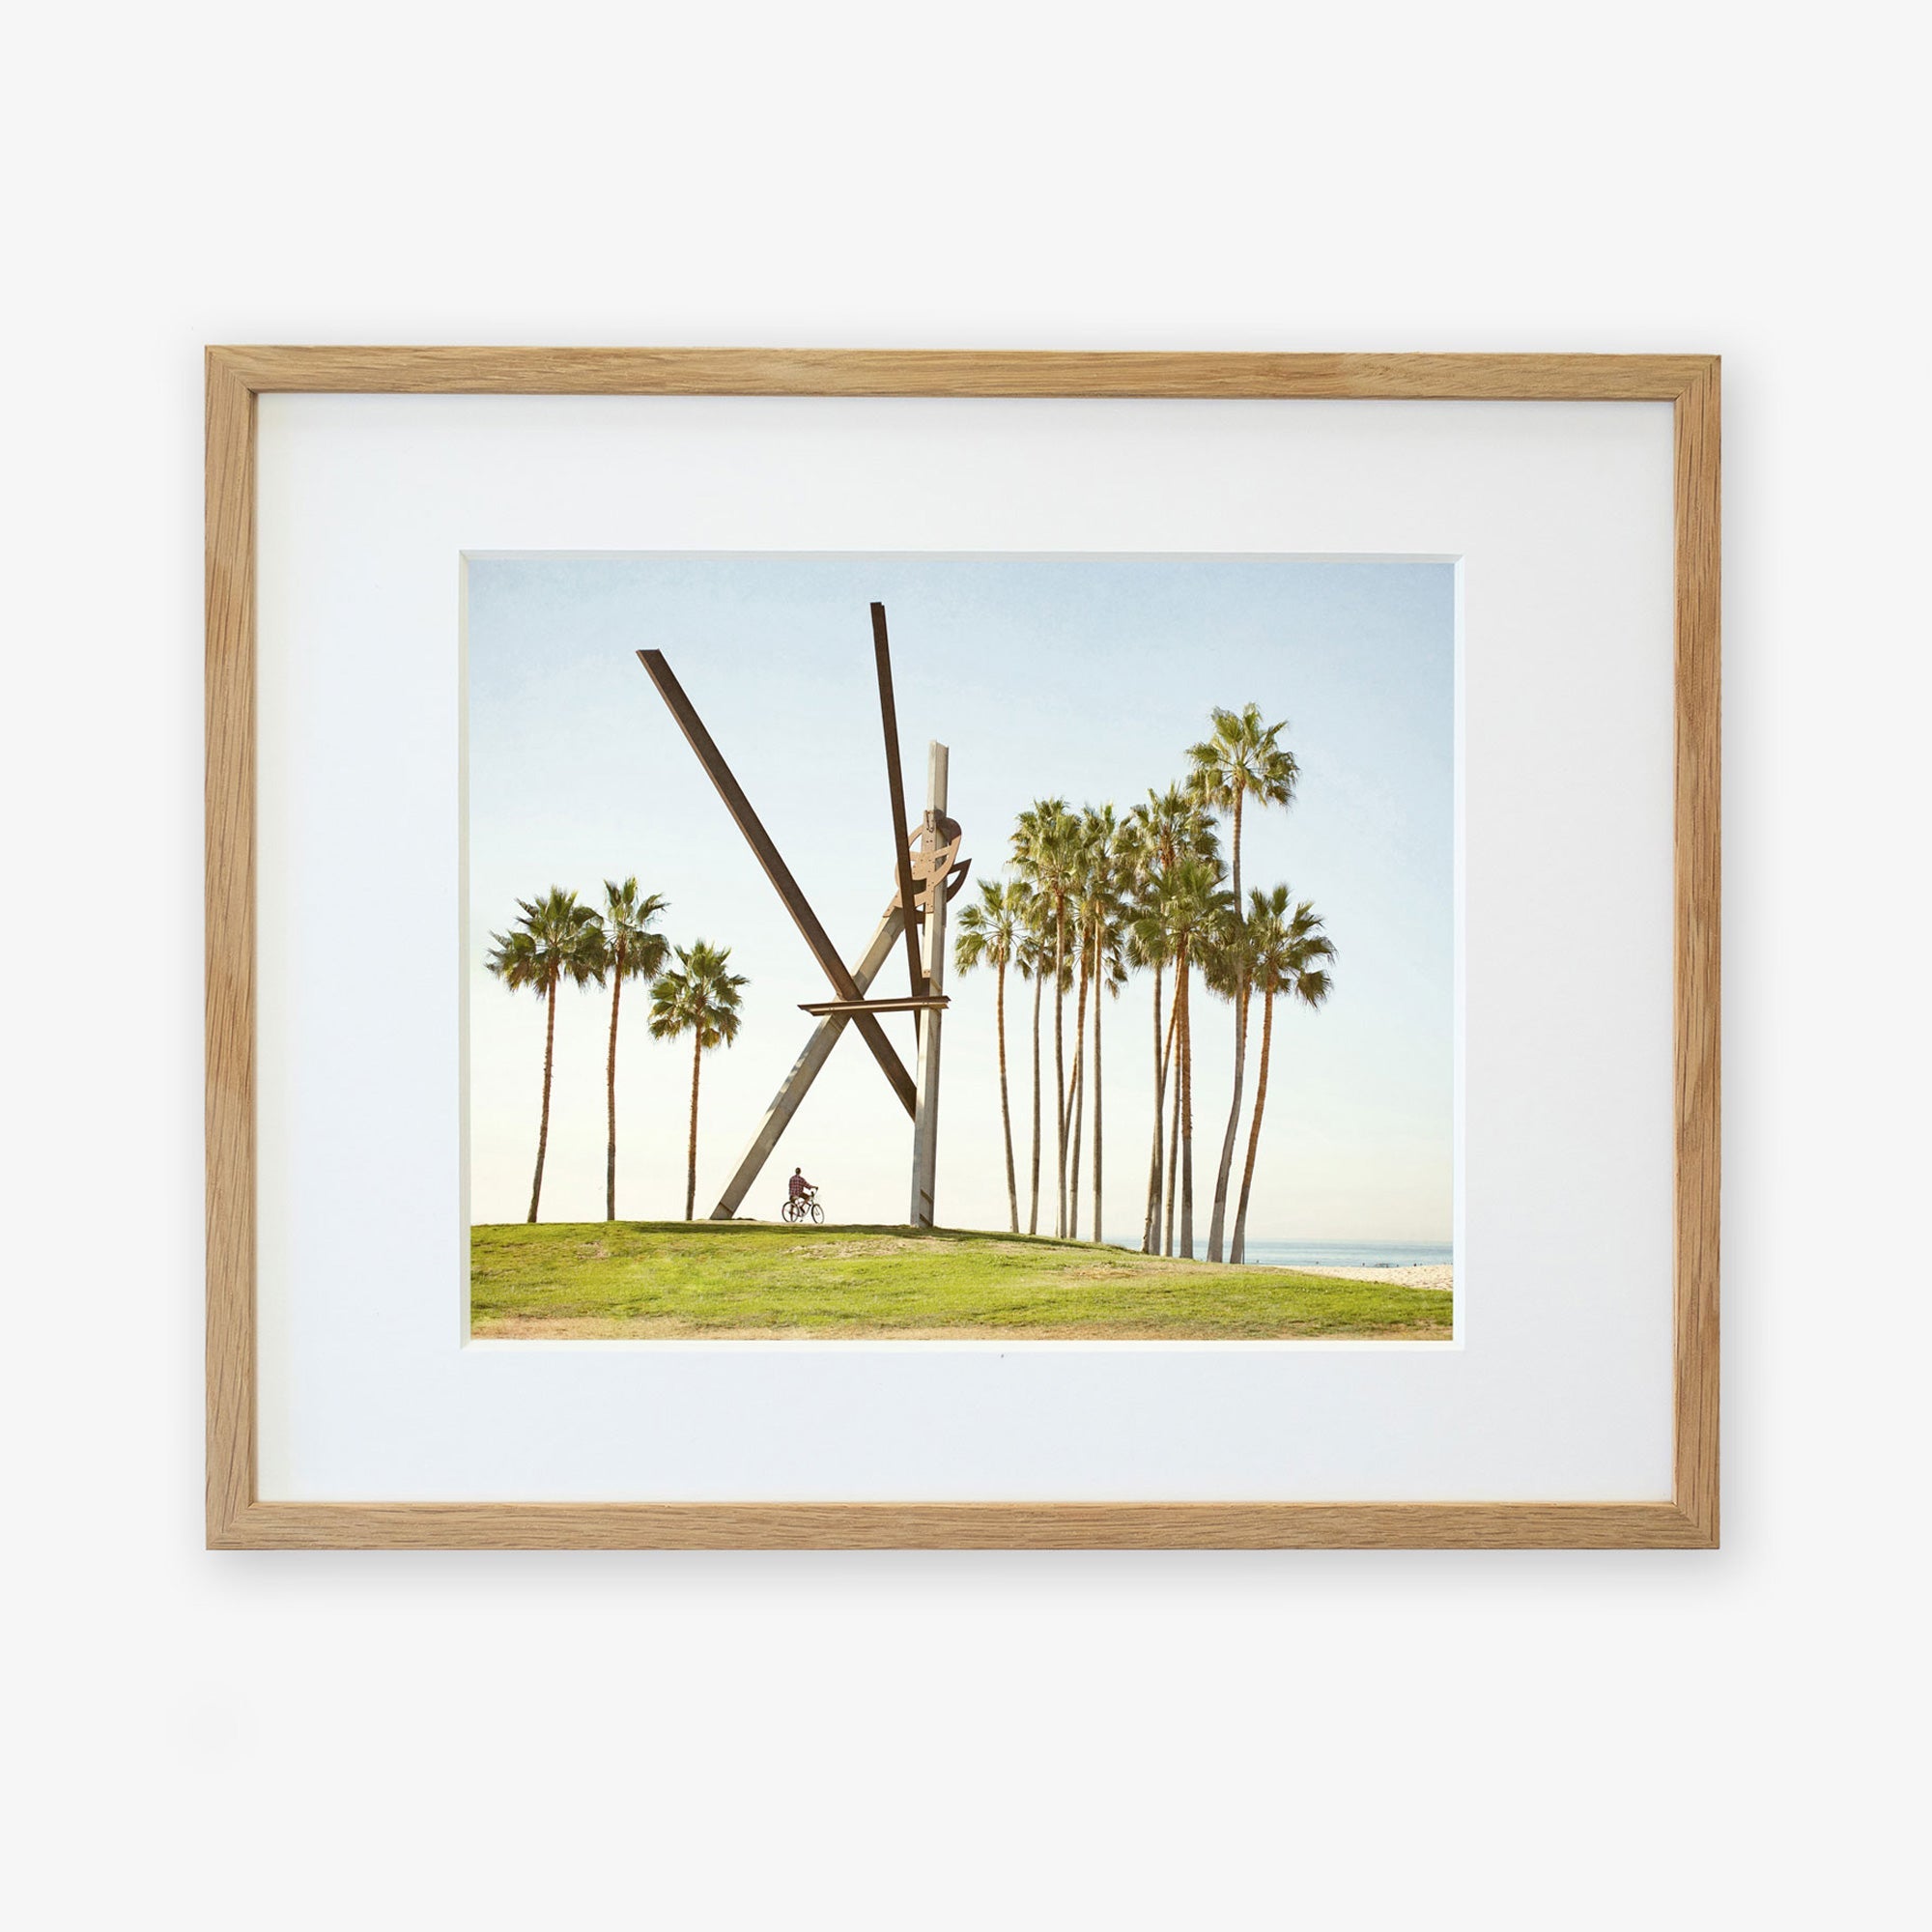 An unframed artwork depicting the Offley Green &#39;V is for Venice&#39; sculpture, a surreal scene with oversized wooden clothespins partially buried in a grassy field, surrounded by tall palm trees under a clear blue sky.